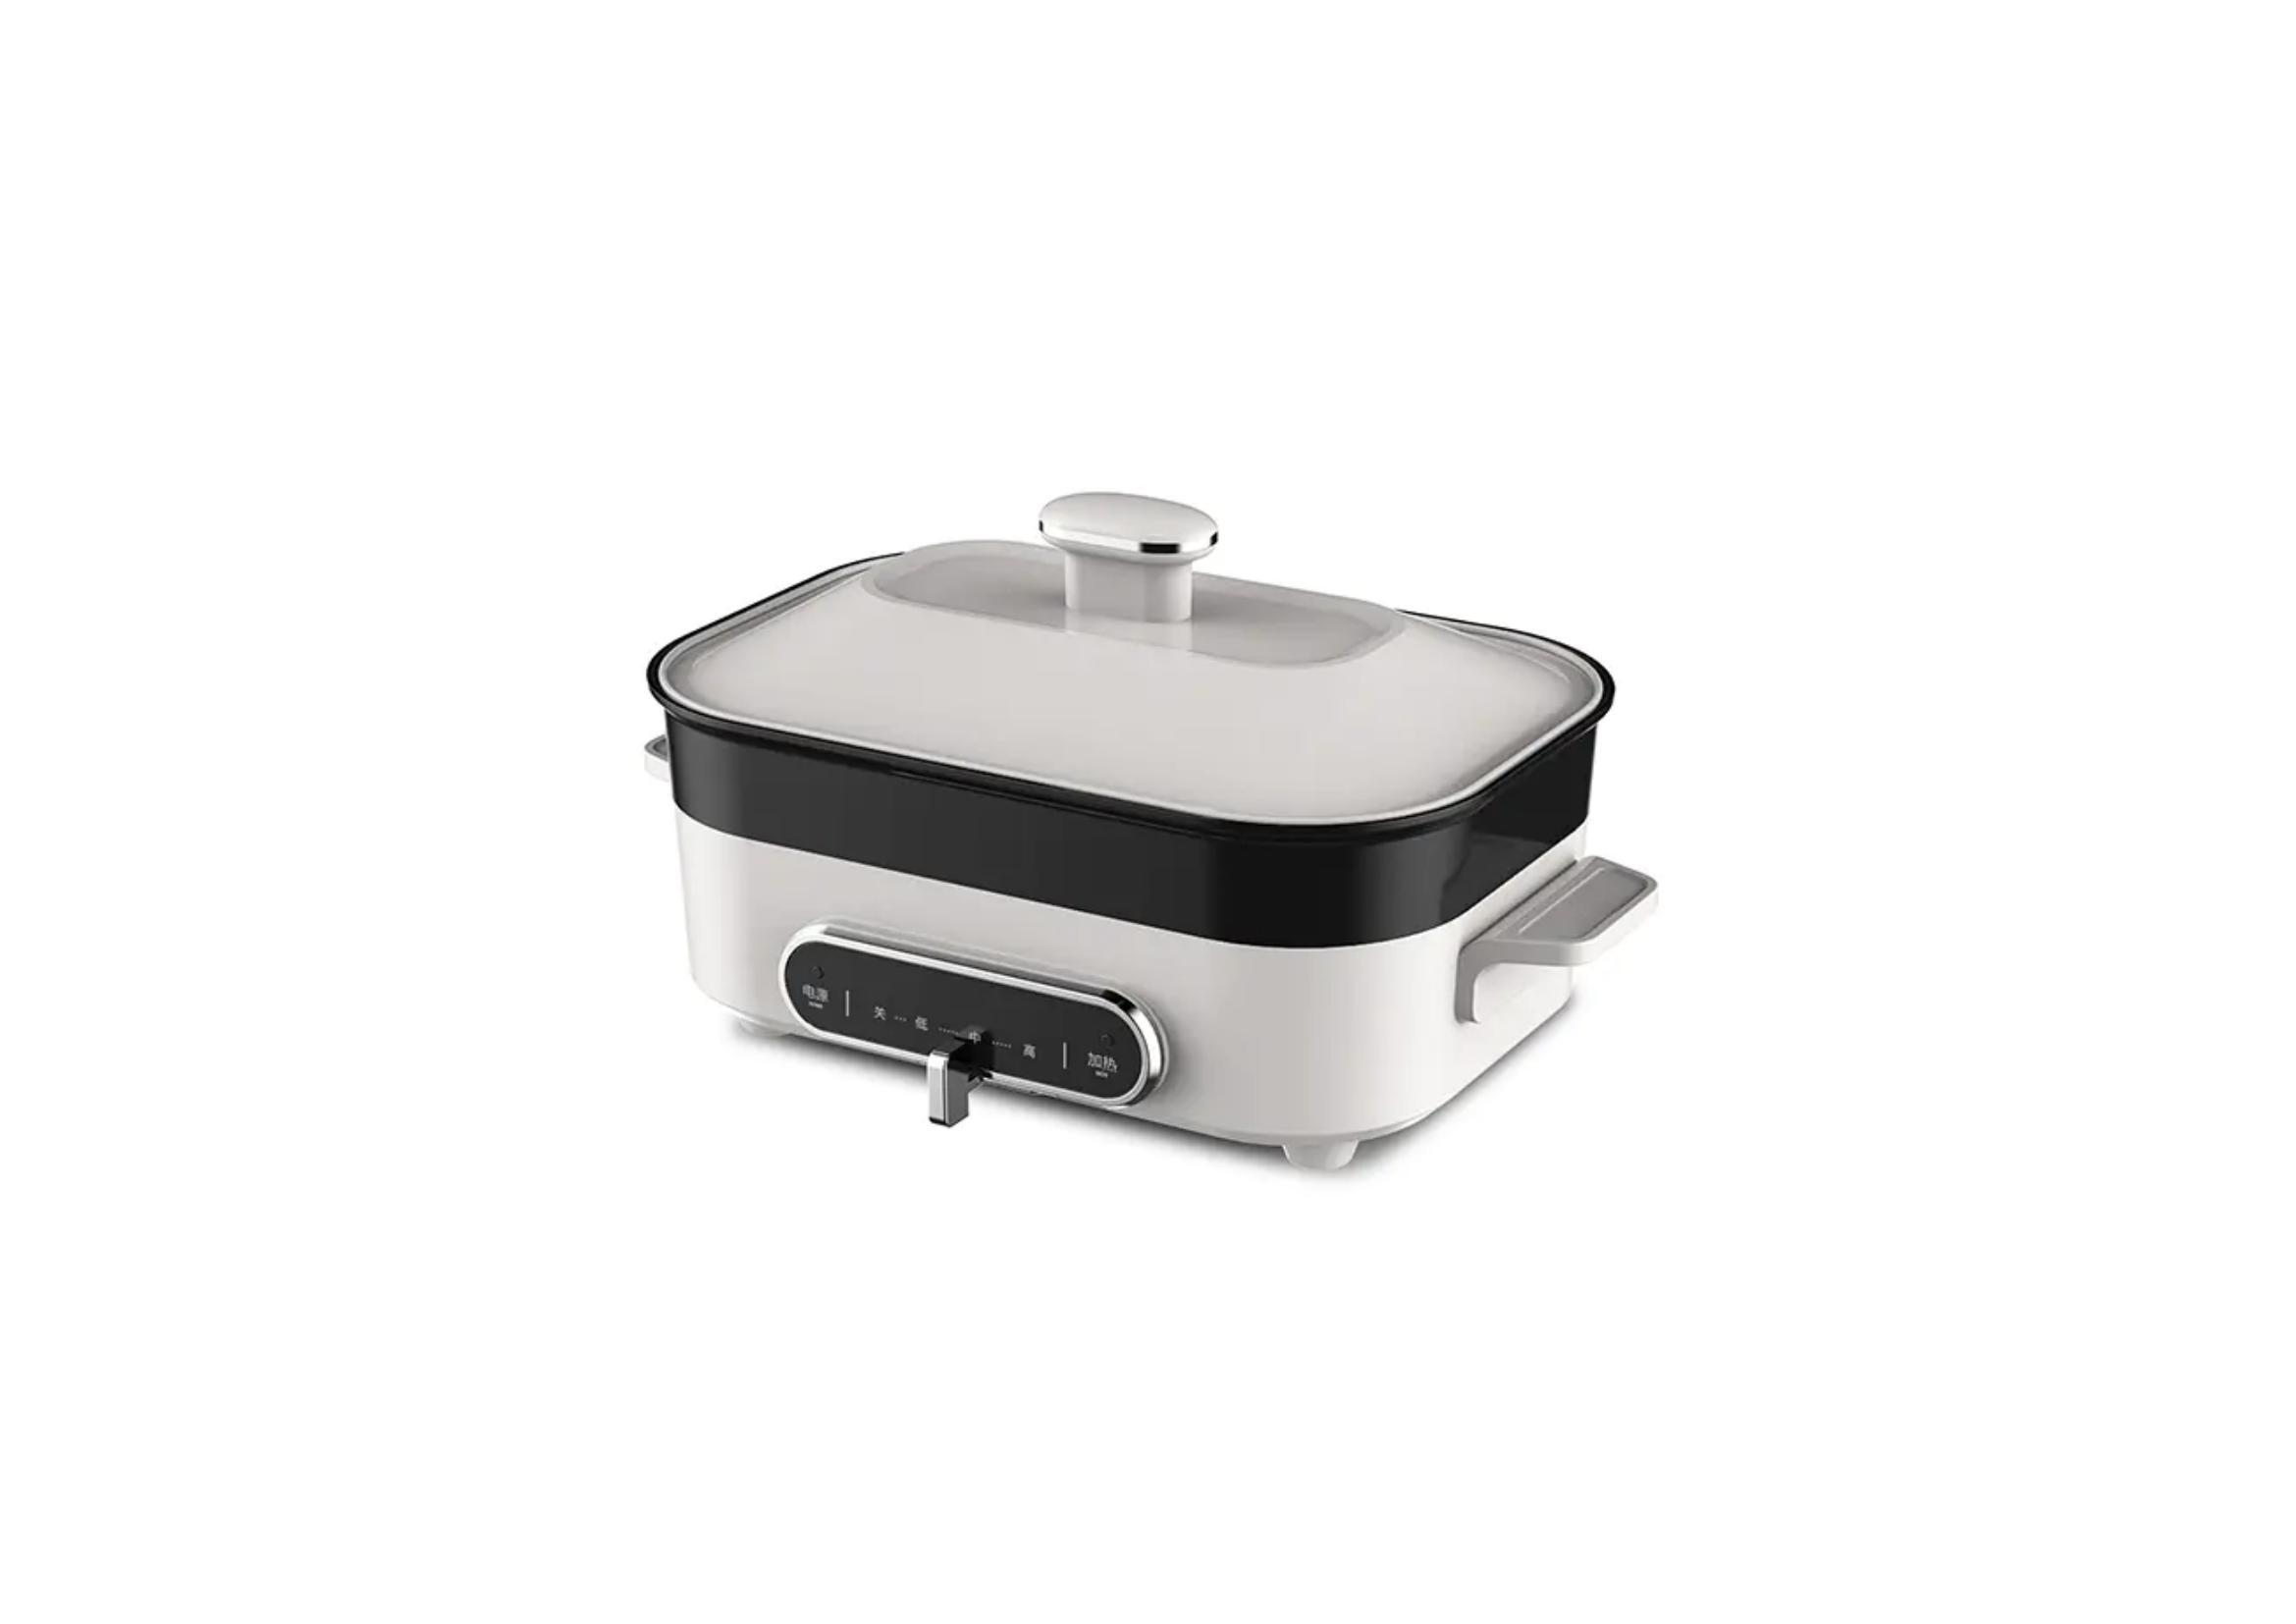 A smokeless grill is an electronic appliance that cooks your food without the need for any burning coals